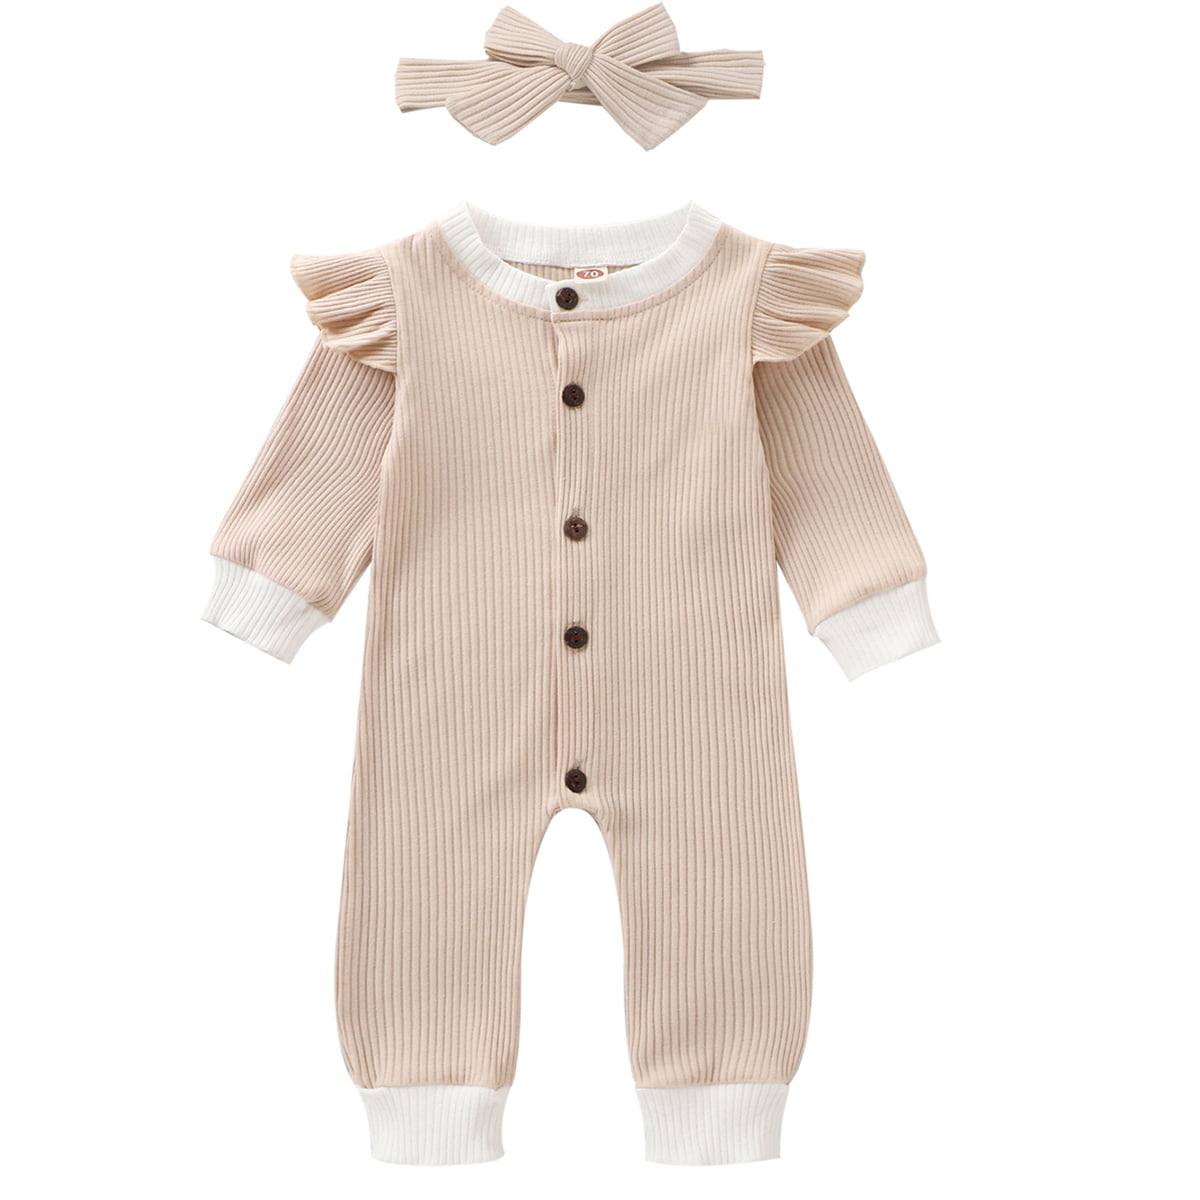 Baby Infant Girls Boys Striped Long Sleeve Romper Jumpsuits Bodysuits One Piece